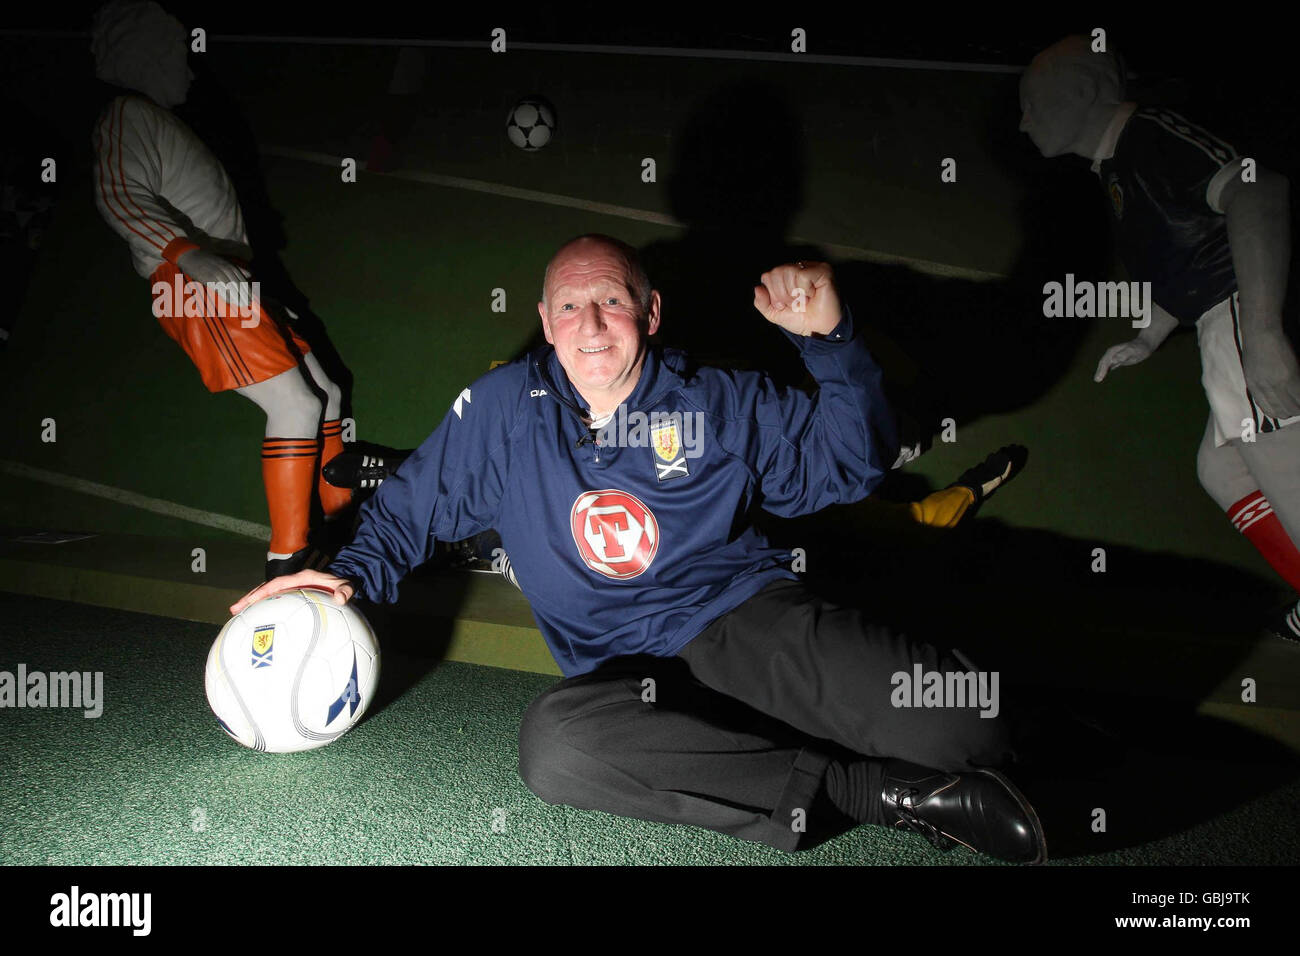 Soccer - Scotland Legends Photocall - Scottish Football Museum. Scotland legend Archie Gemmill who scored against Holland in the 1978 World Cup Finals in Argentina, at Hampden Park, Glasgow. Stock Photo